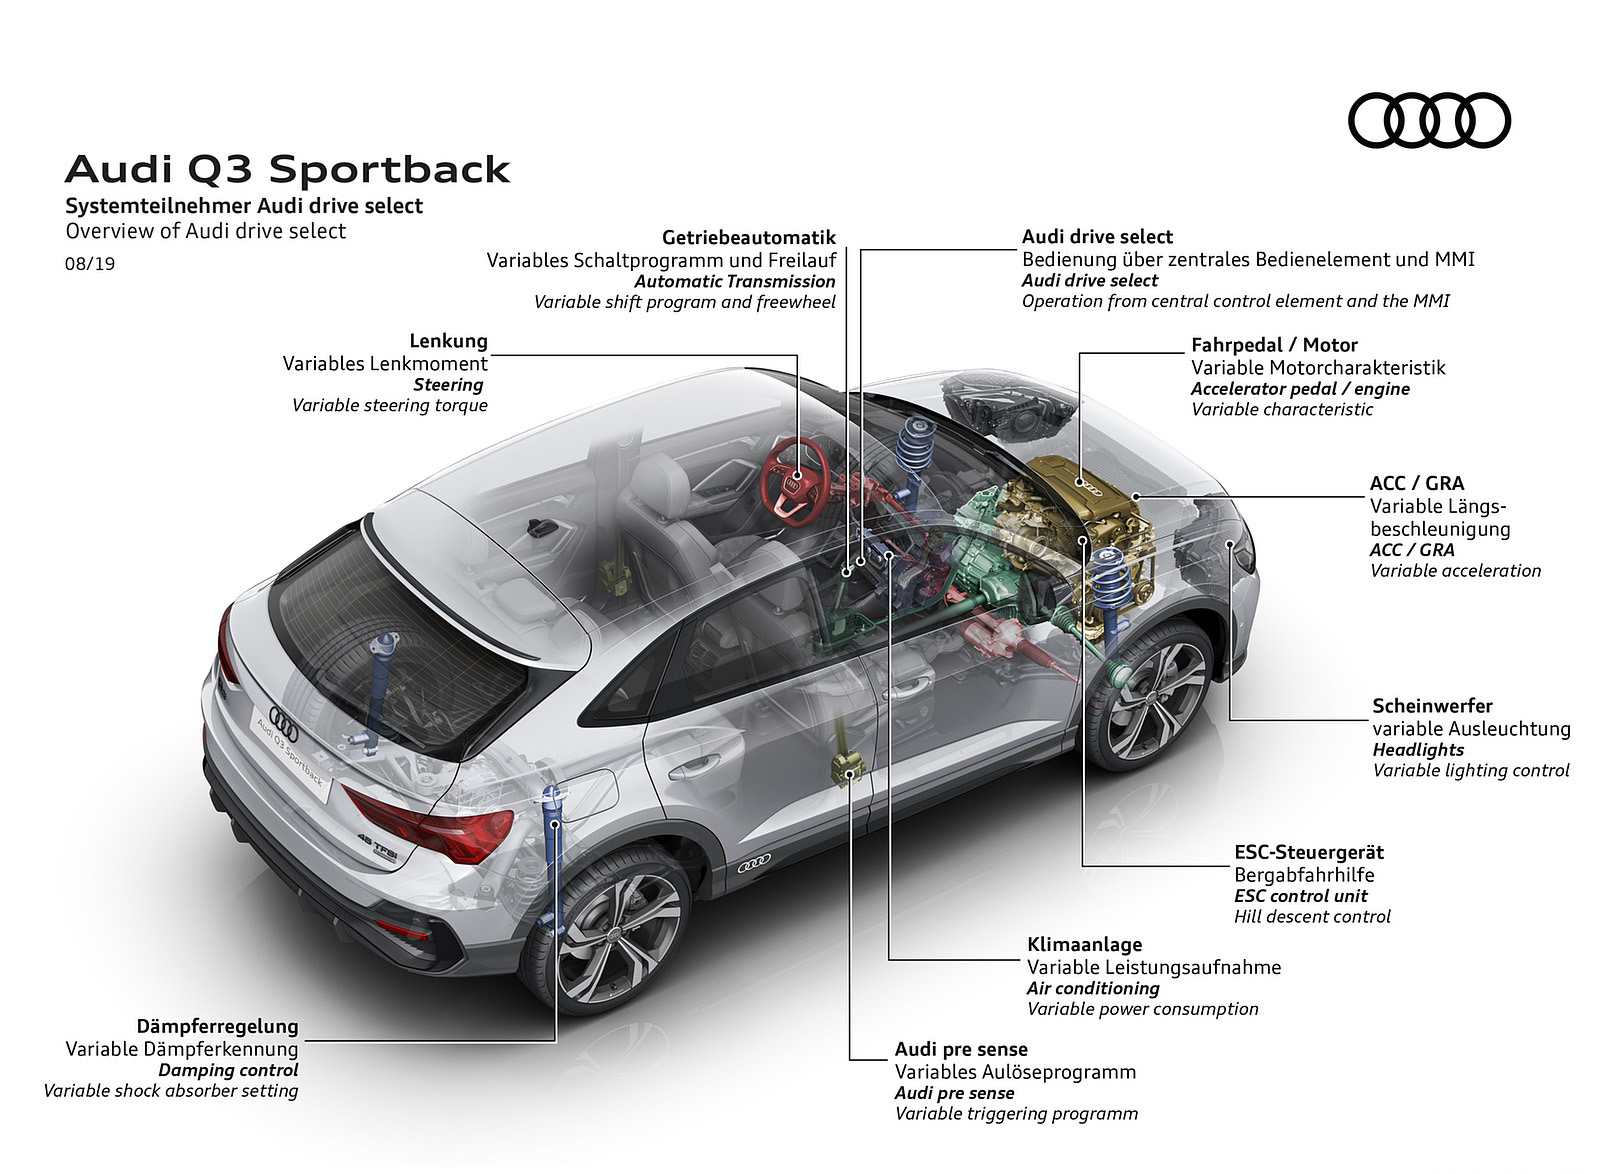 2020 Audi Q3 Sportback Overview of Audi drive select Wallpapers #255 of 285